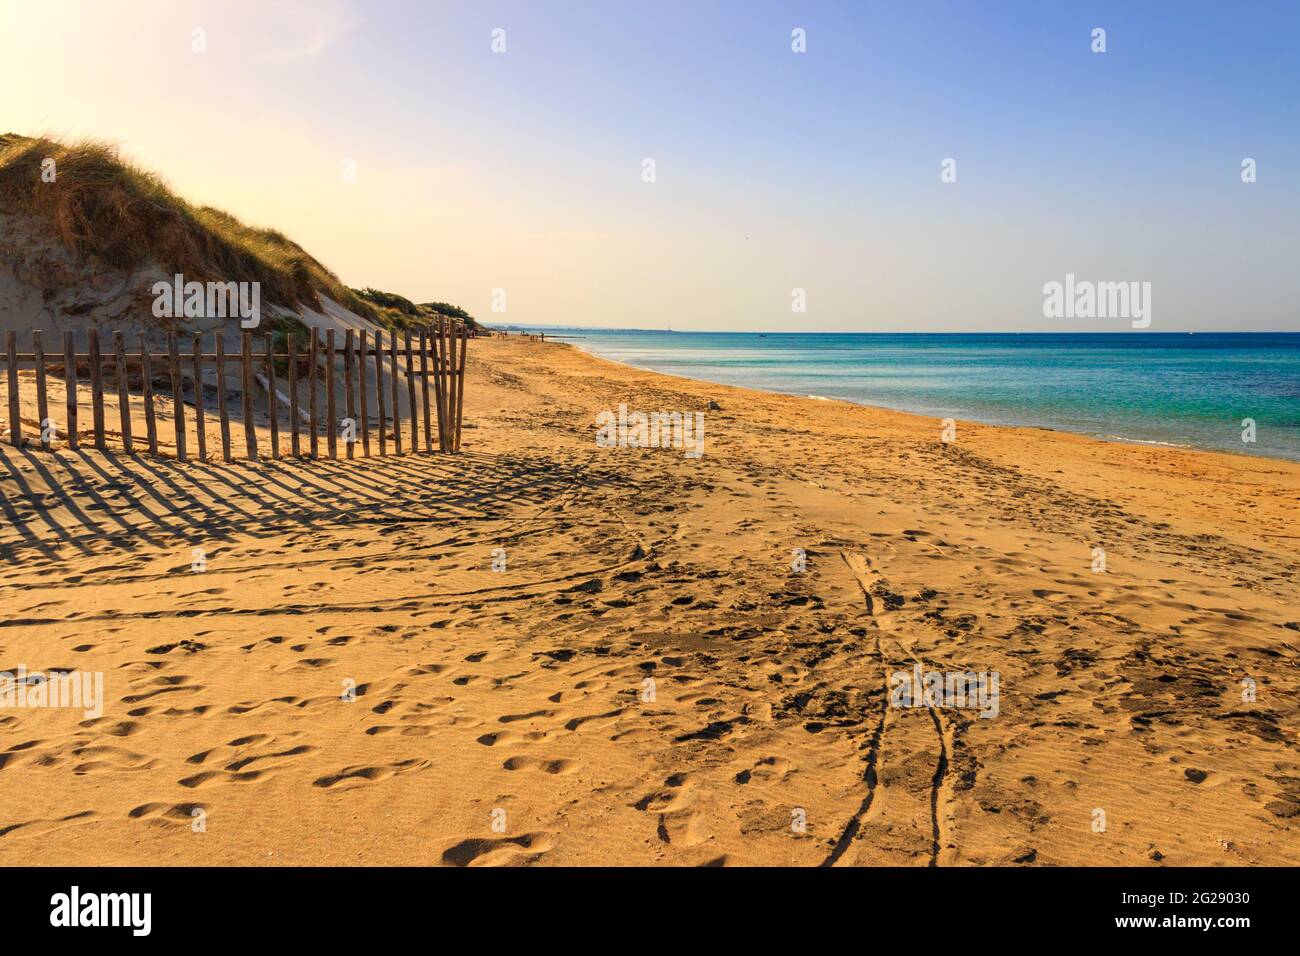 The Regional Natural Park Dune Costiere (Torre Canne): fence between sea dunes, Apulia (Italy). Stock Photo